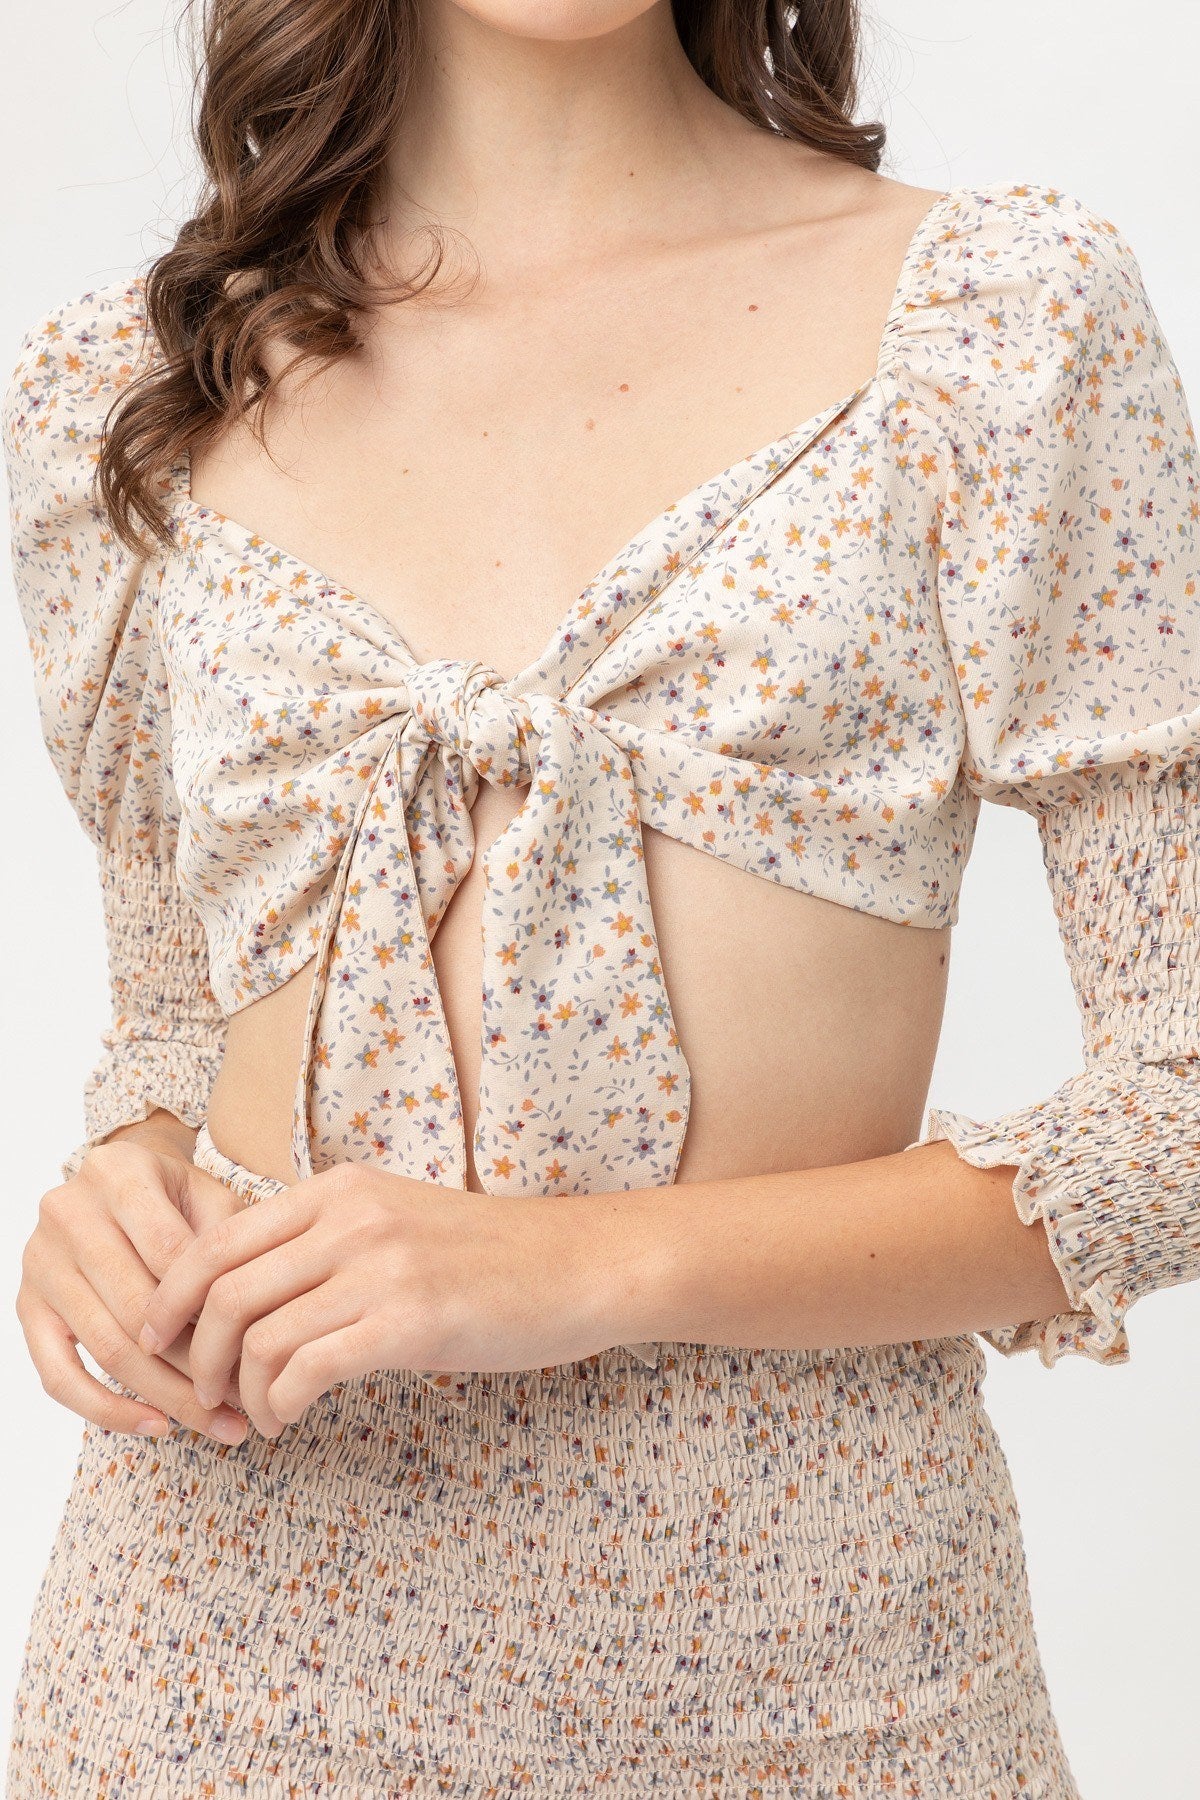 Front Tie Woven Printed Top Sunny EvE Fashion